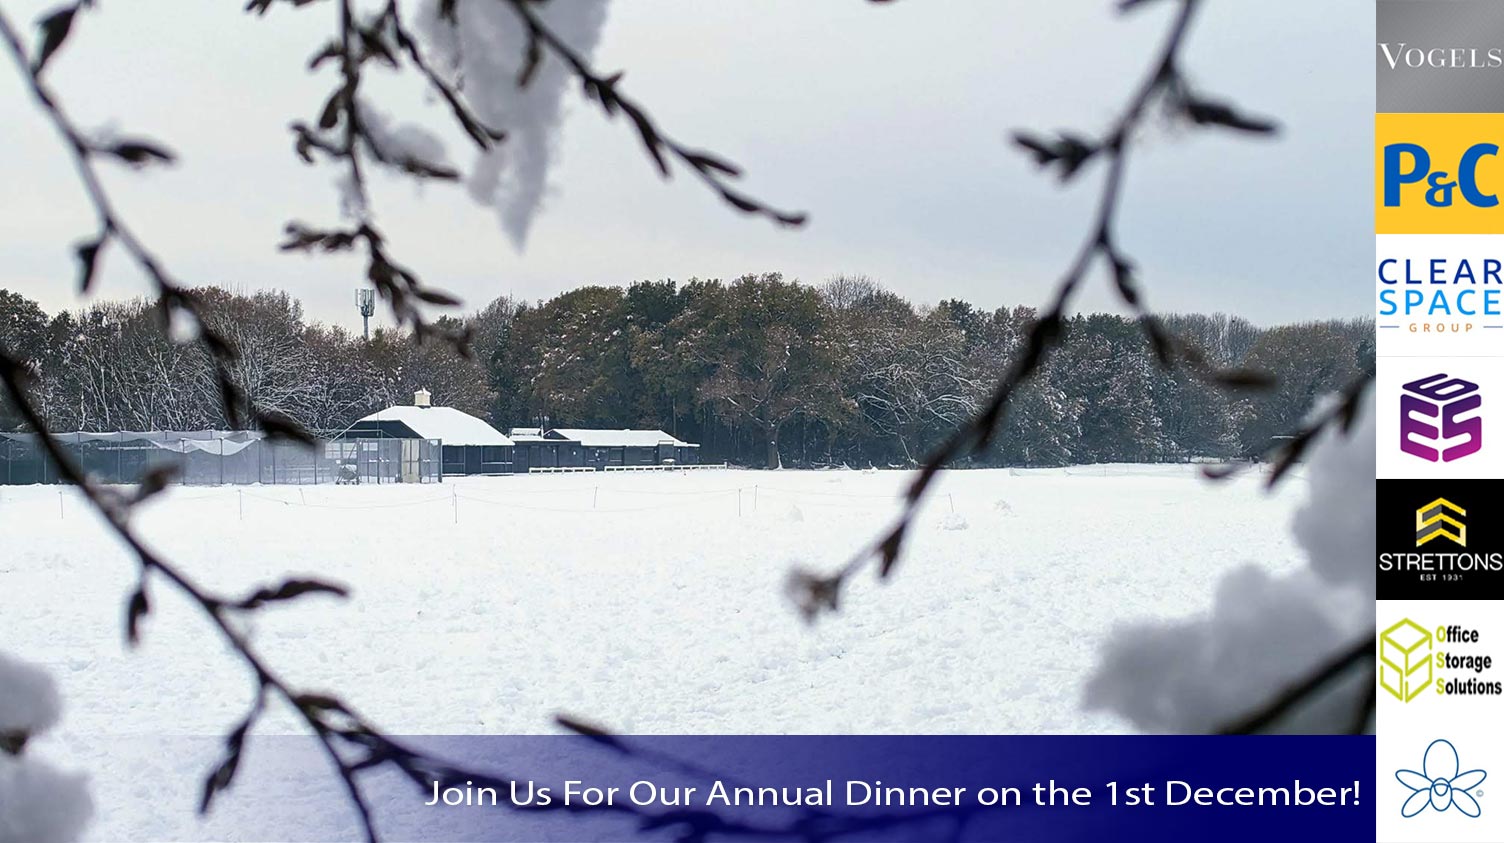 Join us for our Annual Dinner